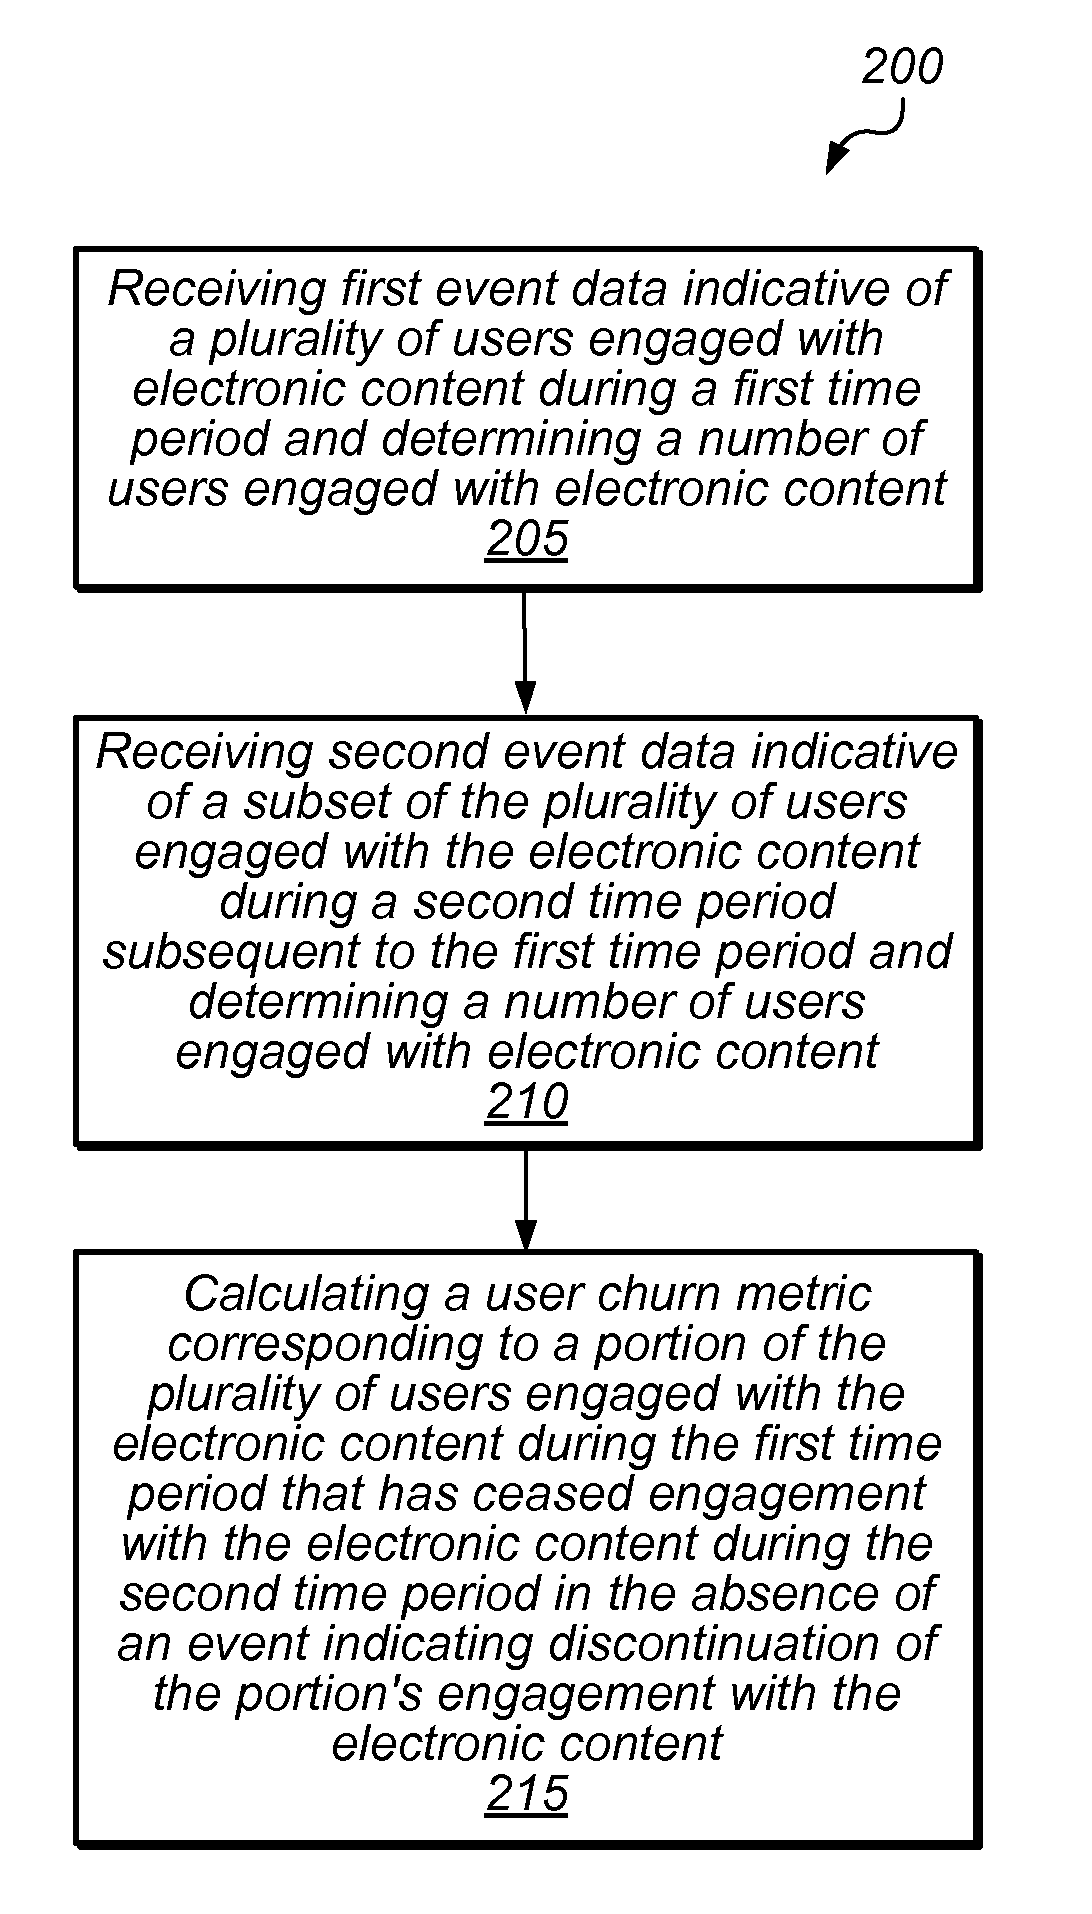 Systems and methods for user churn reporting based on engagement metrics